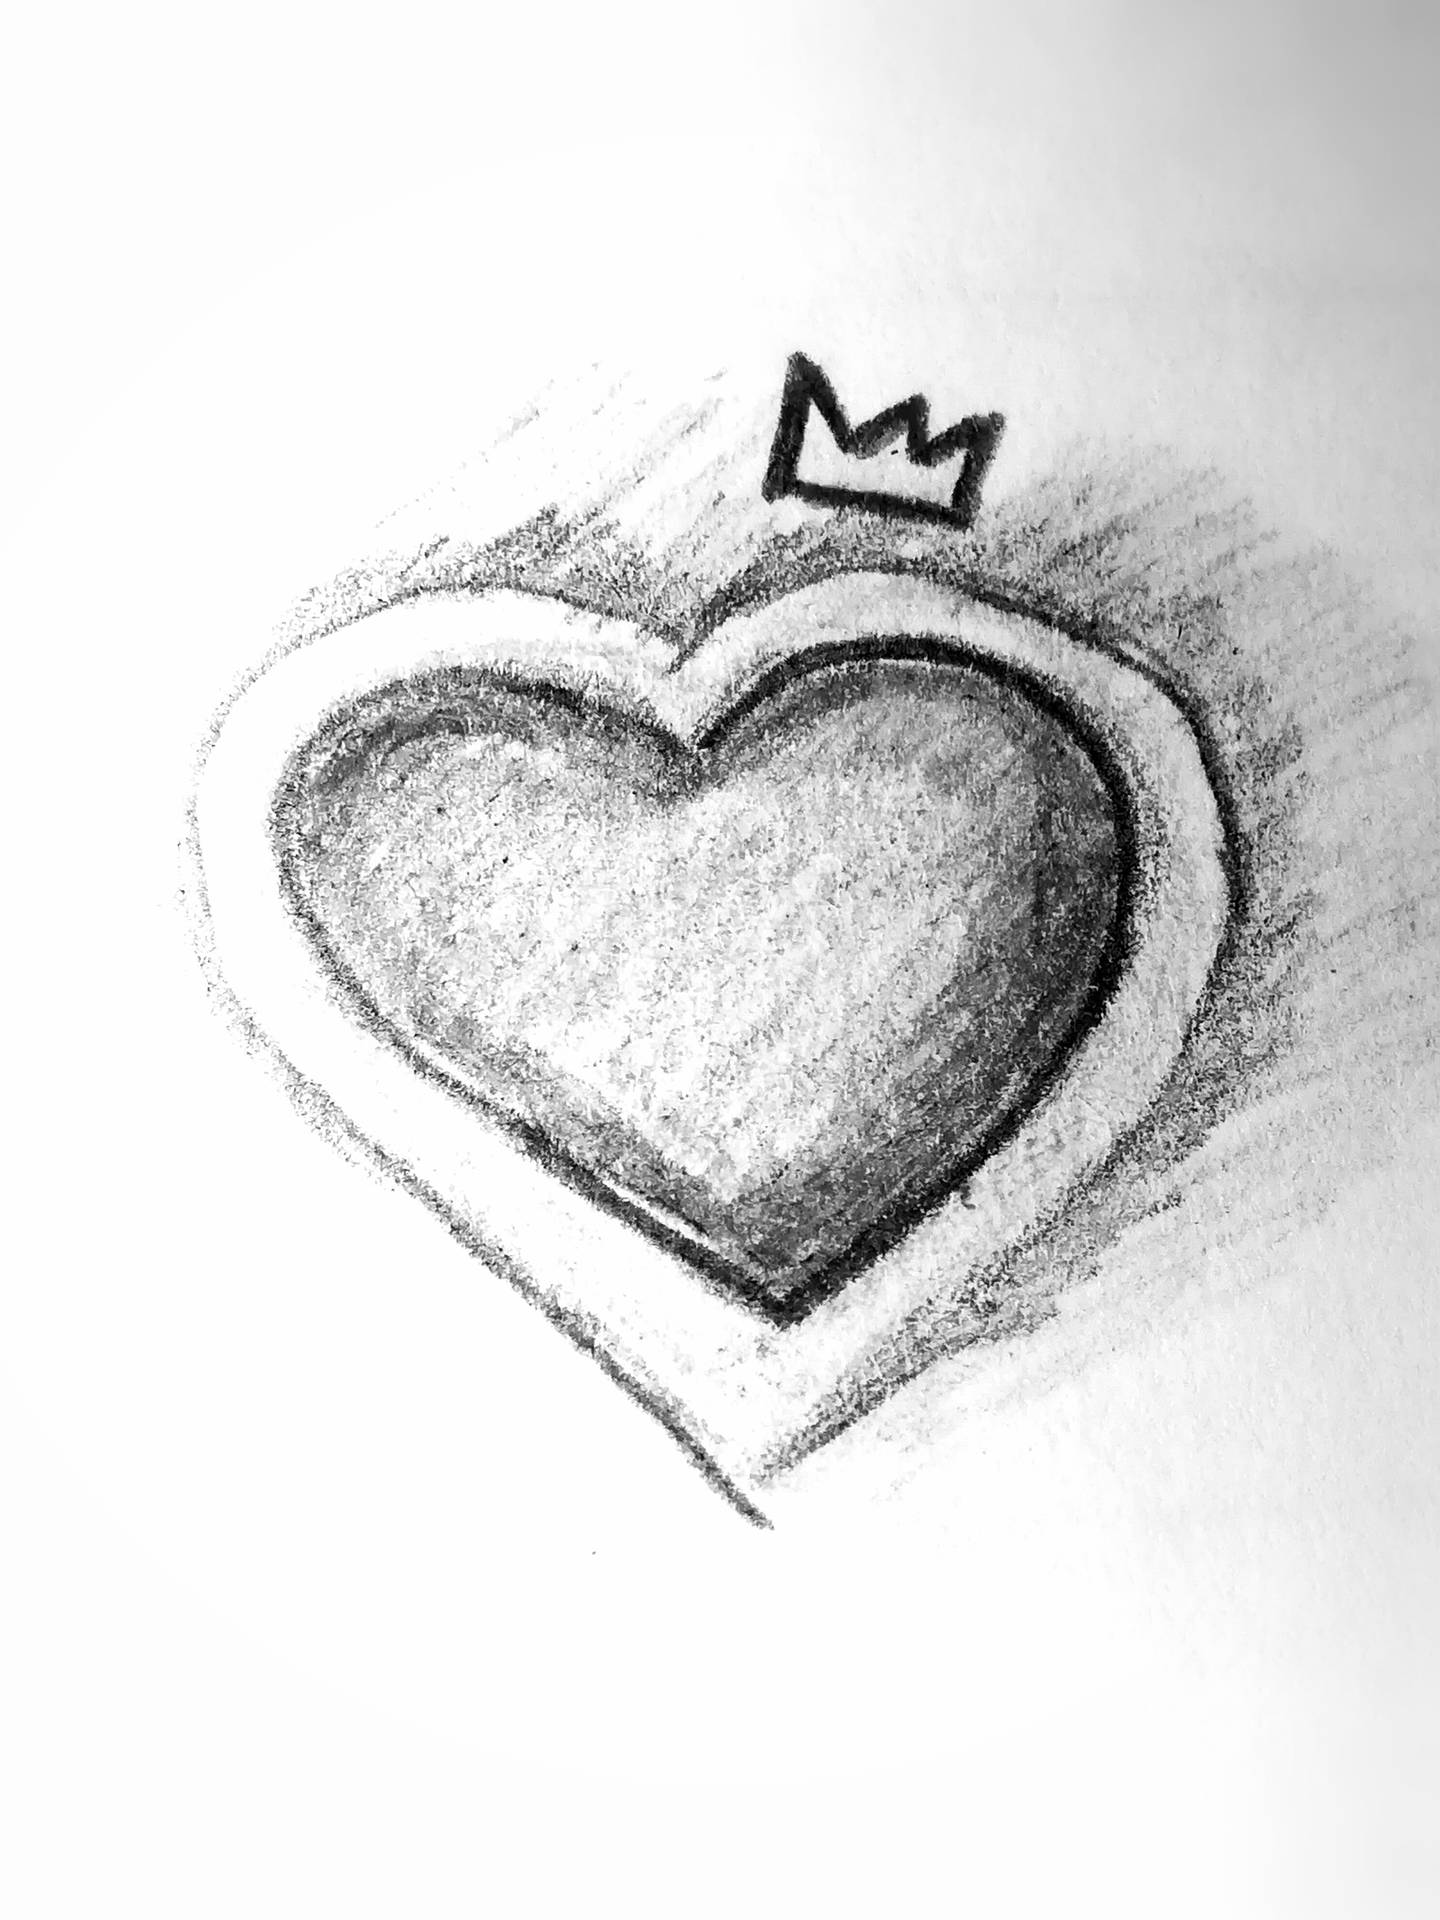 Black And White Heart Sketch